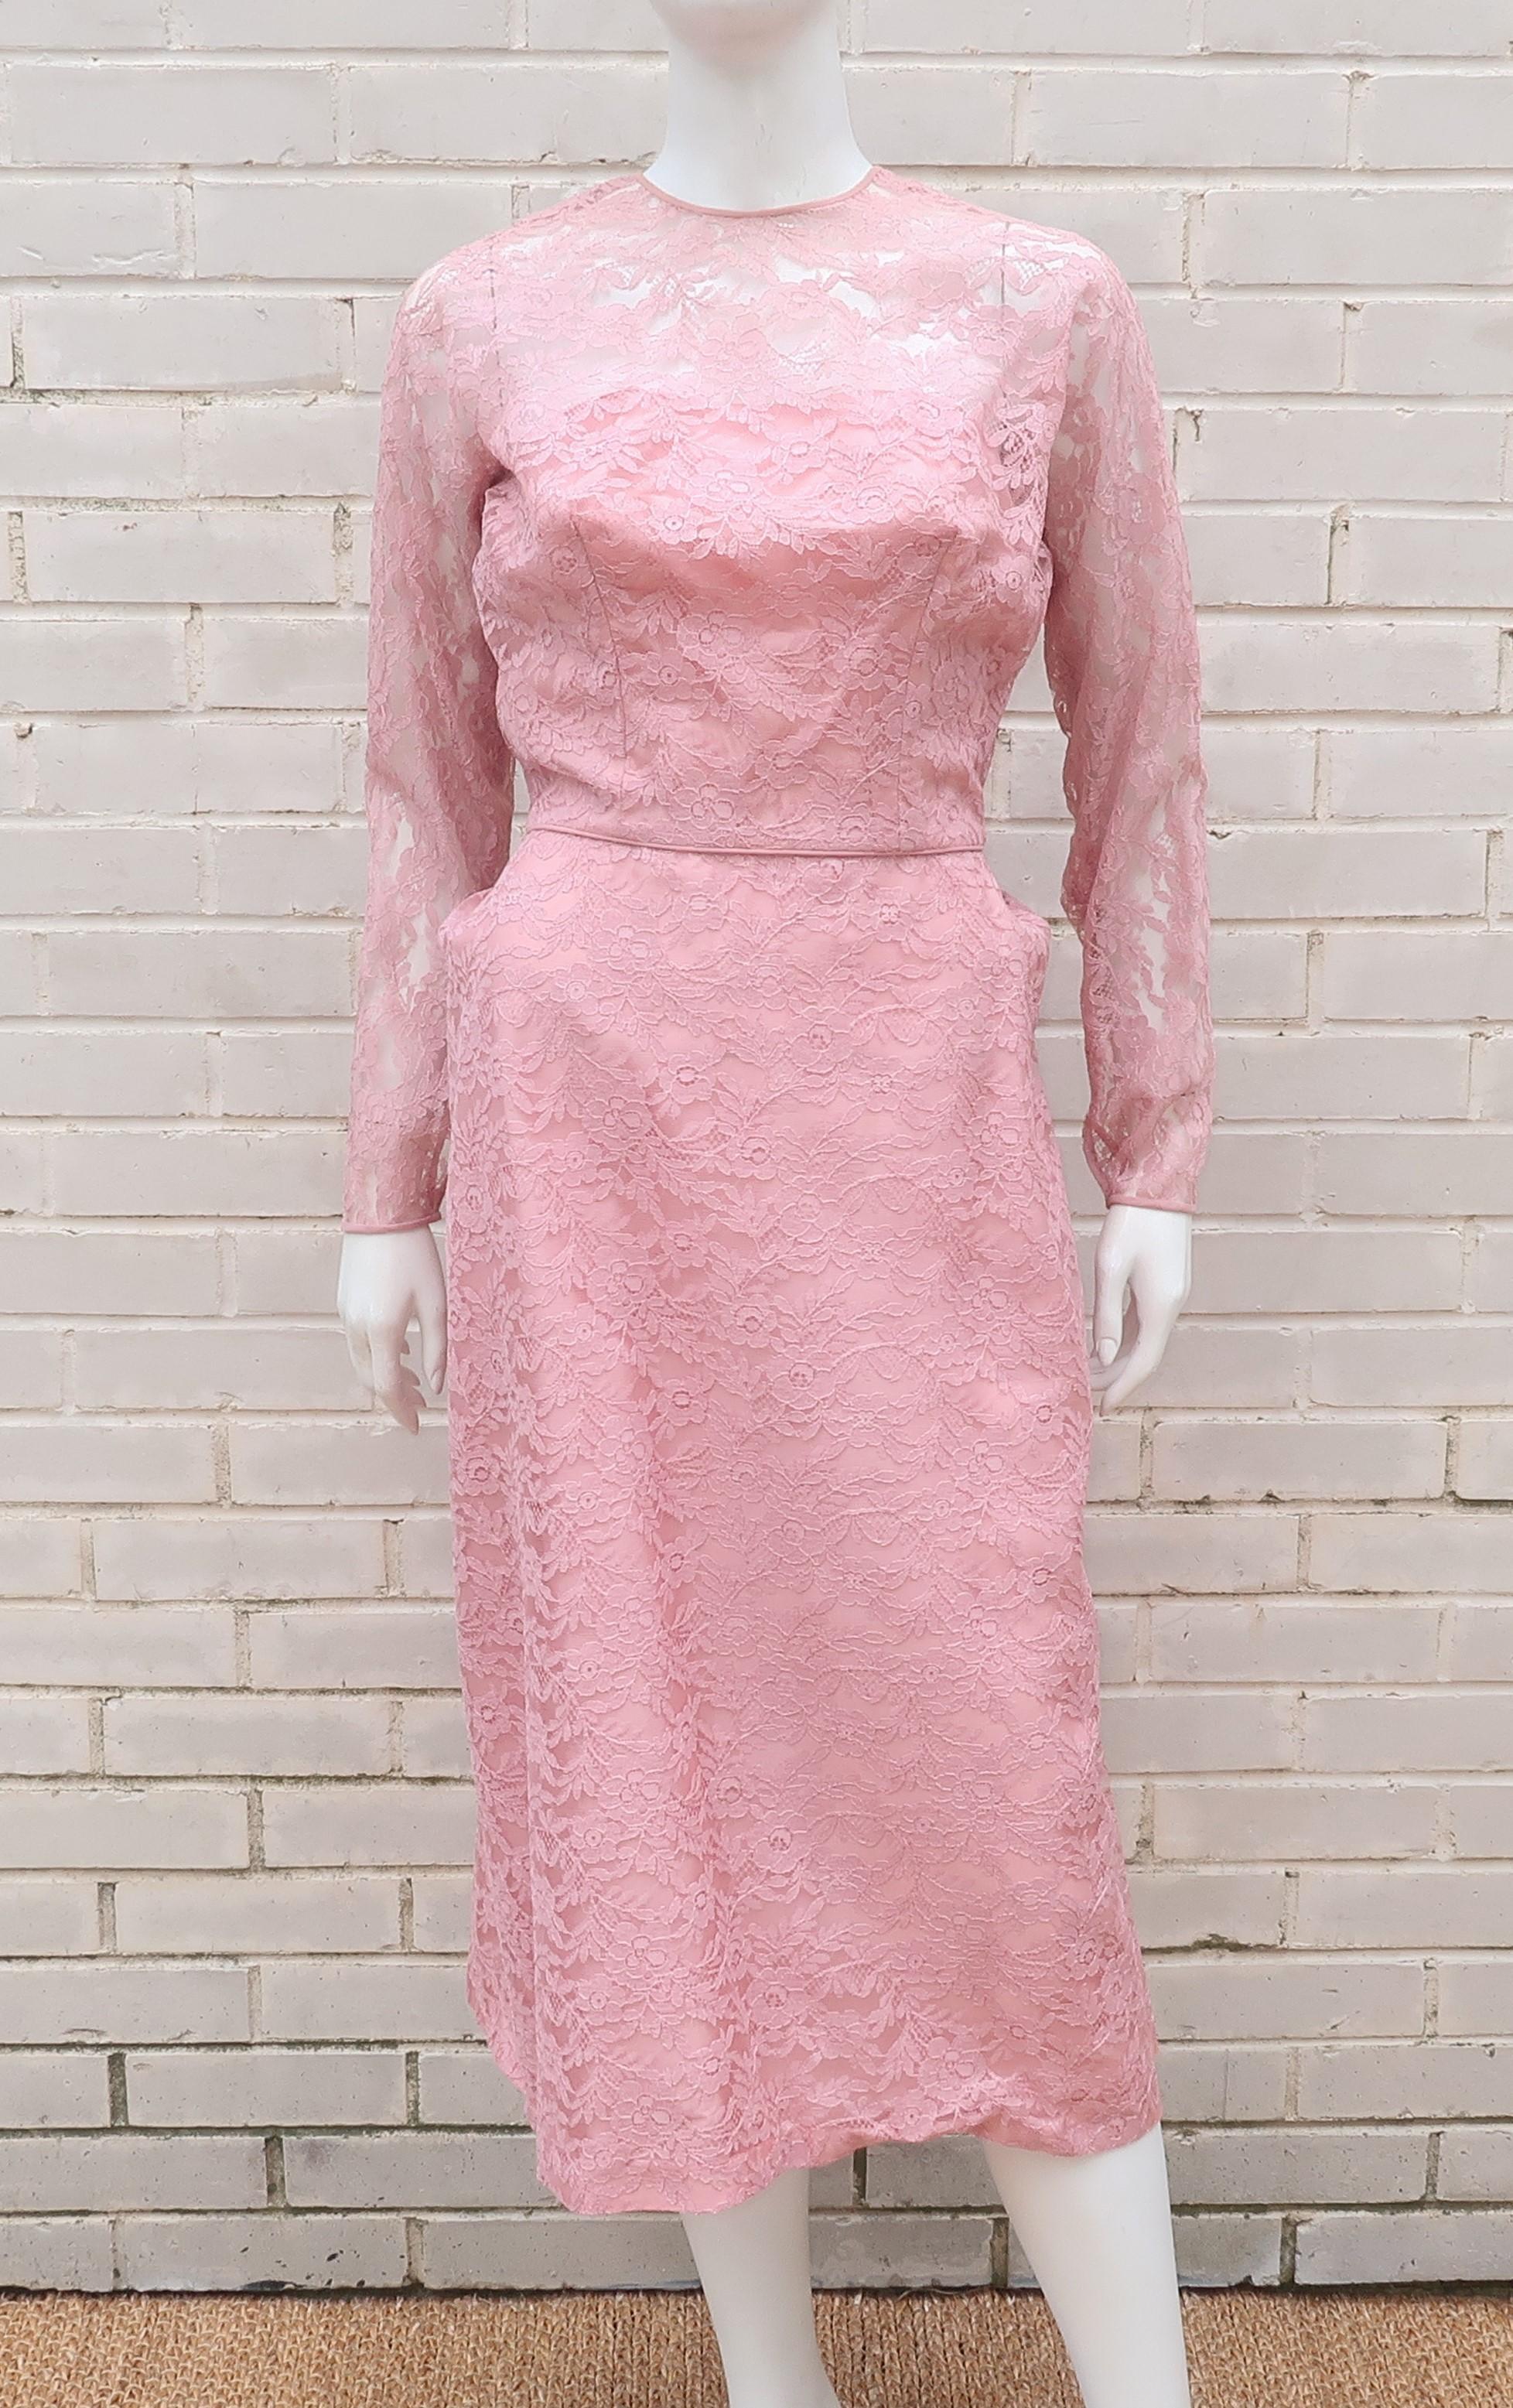 A lovely 1950's cocktail dress from Lee Claire New York in a mauve pink lace with a unique modified bustle style silhouette.  The dress zips and hooks at the back with a button at the neckline and snaps at the cuffs.  The modified bustle is